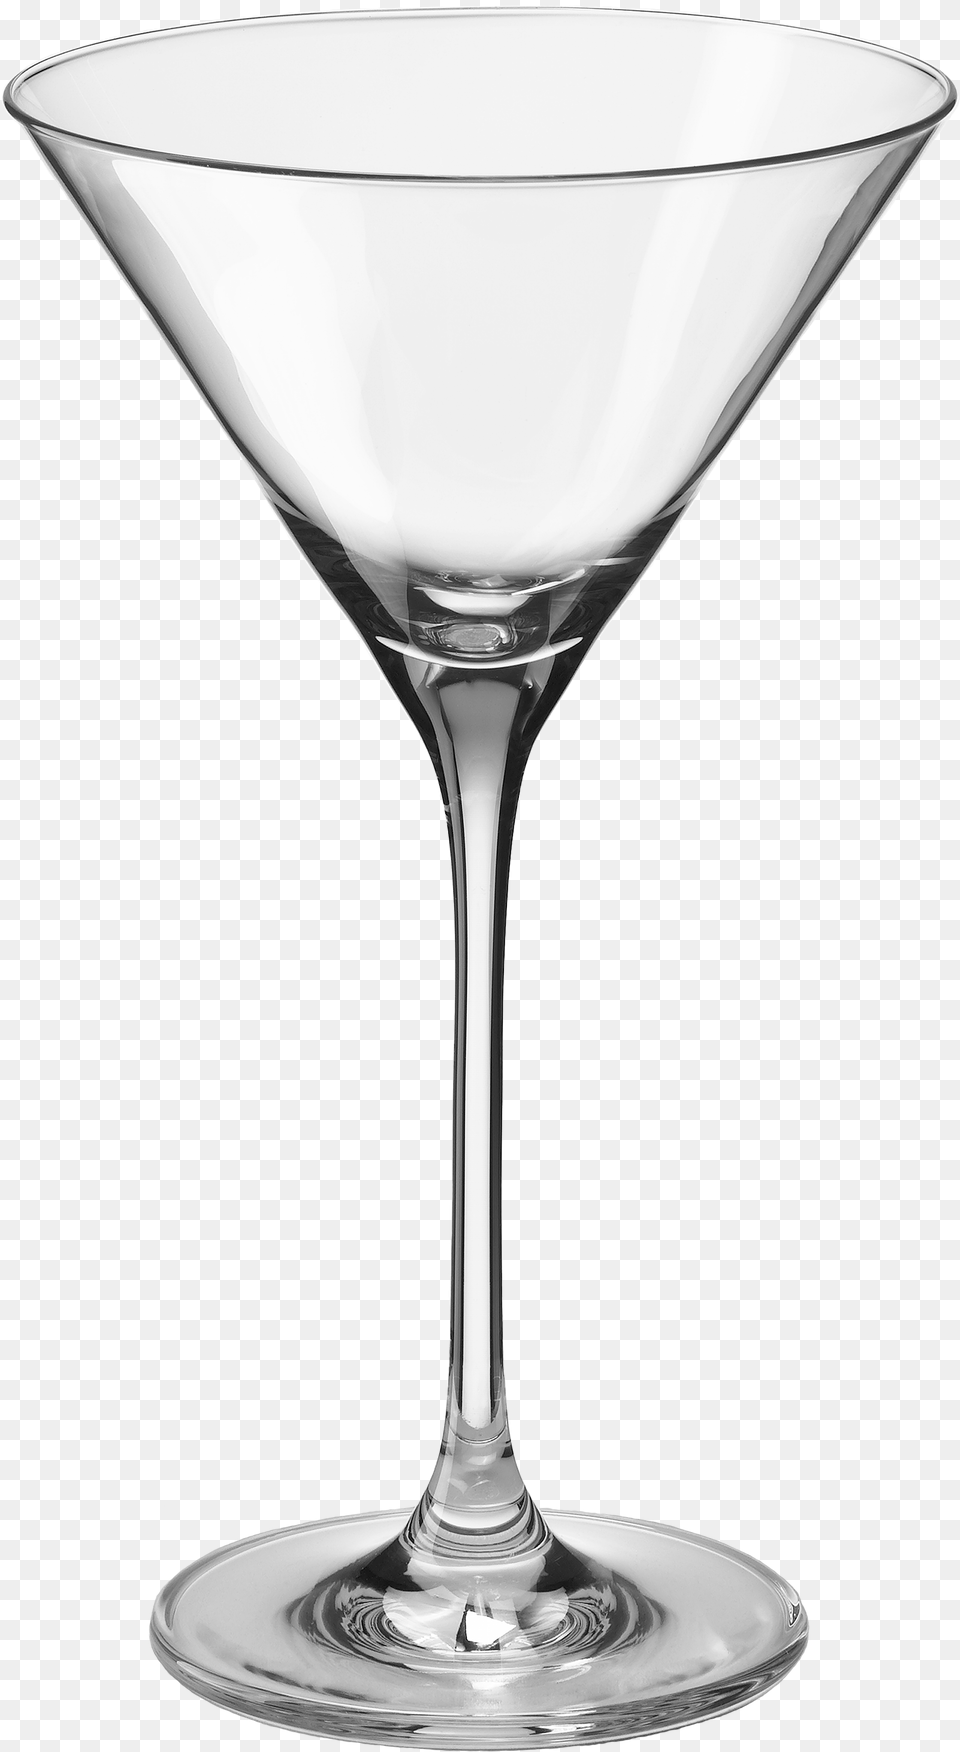 Martini Glass Cocktail Glass, Alcohol, Beverage, Smoke Pipe Png